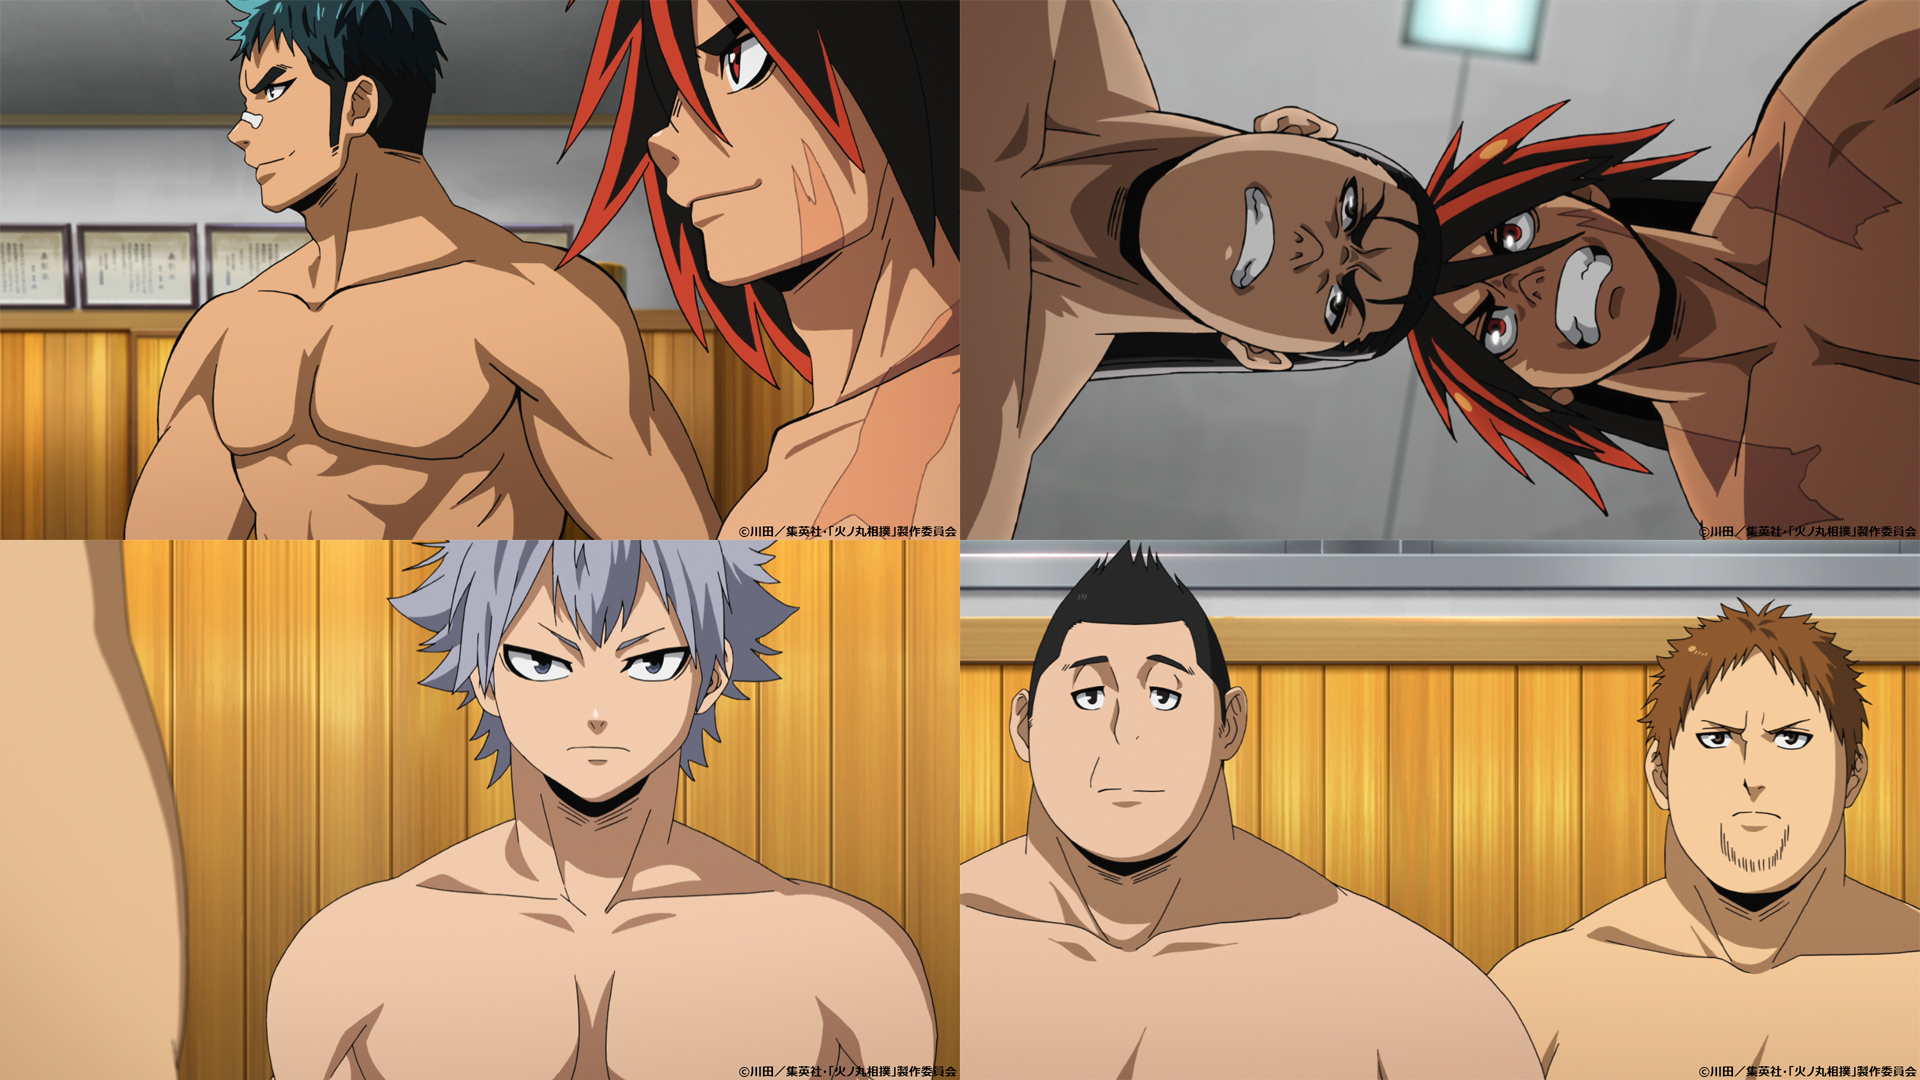 Hinomaru Sumo Archives - I drink and watch anime